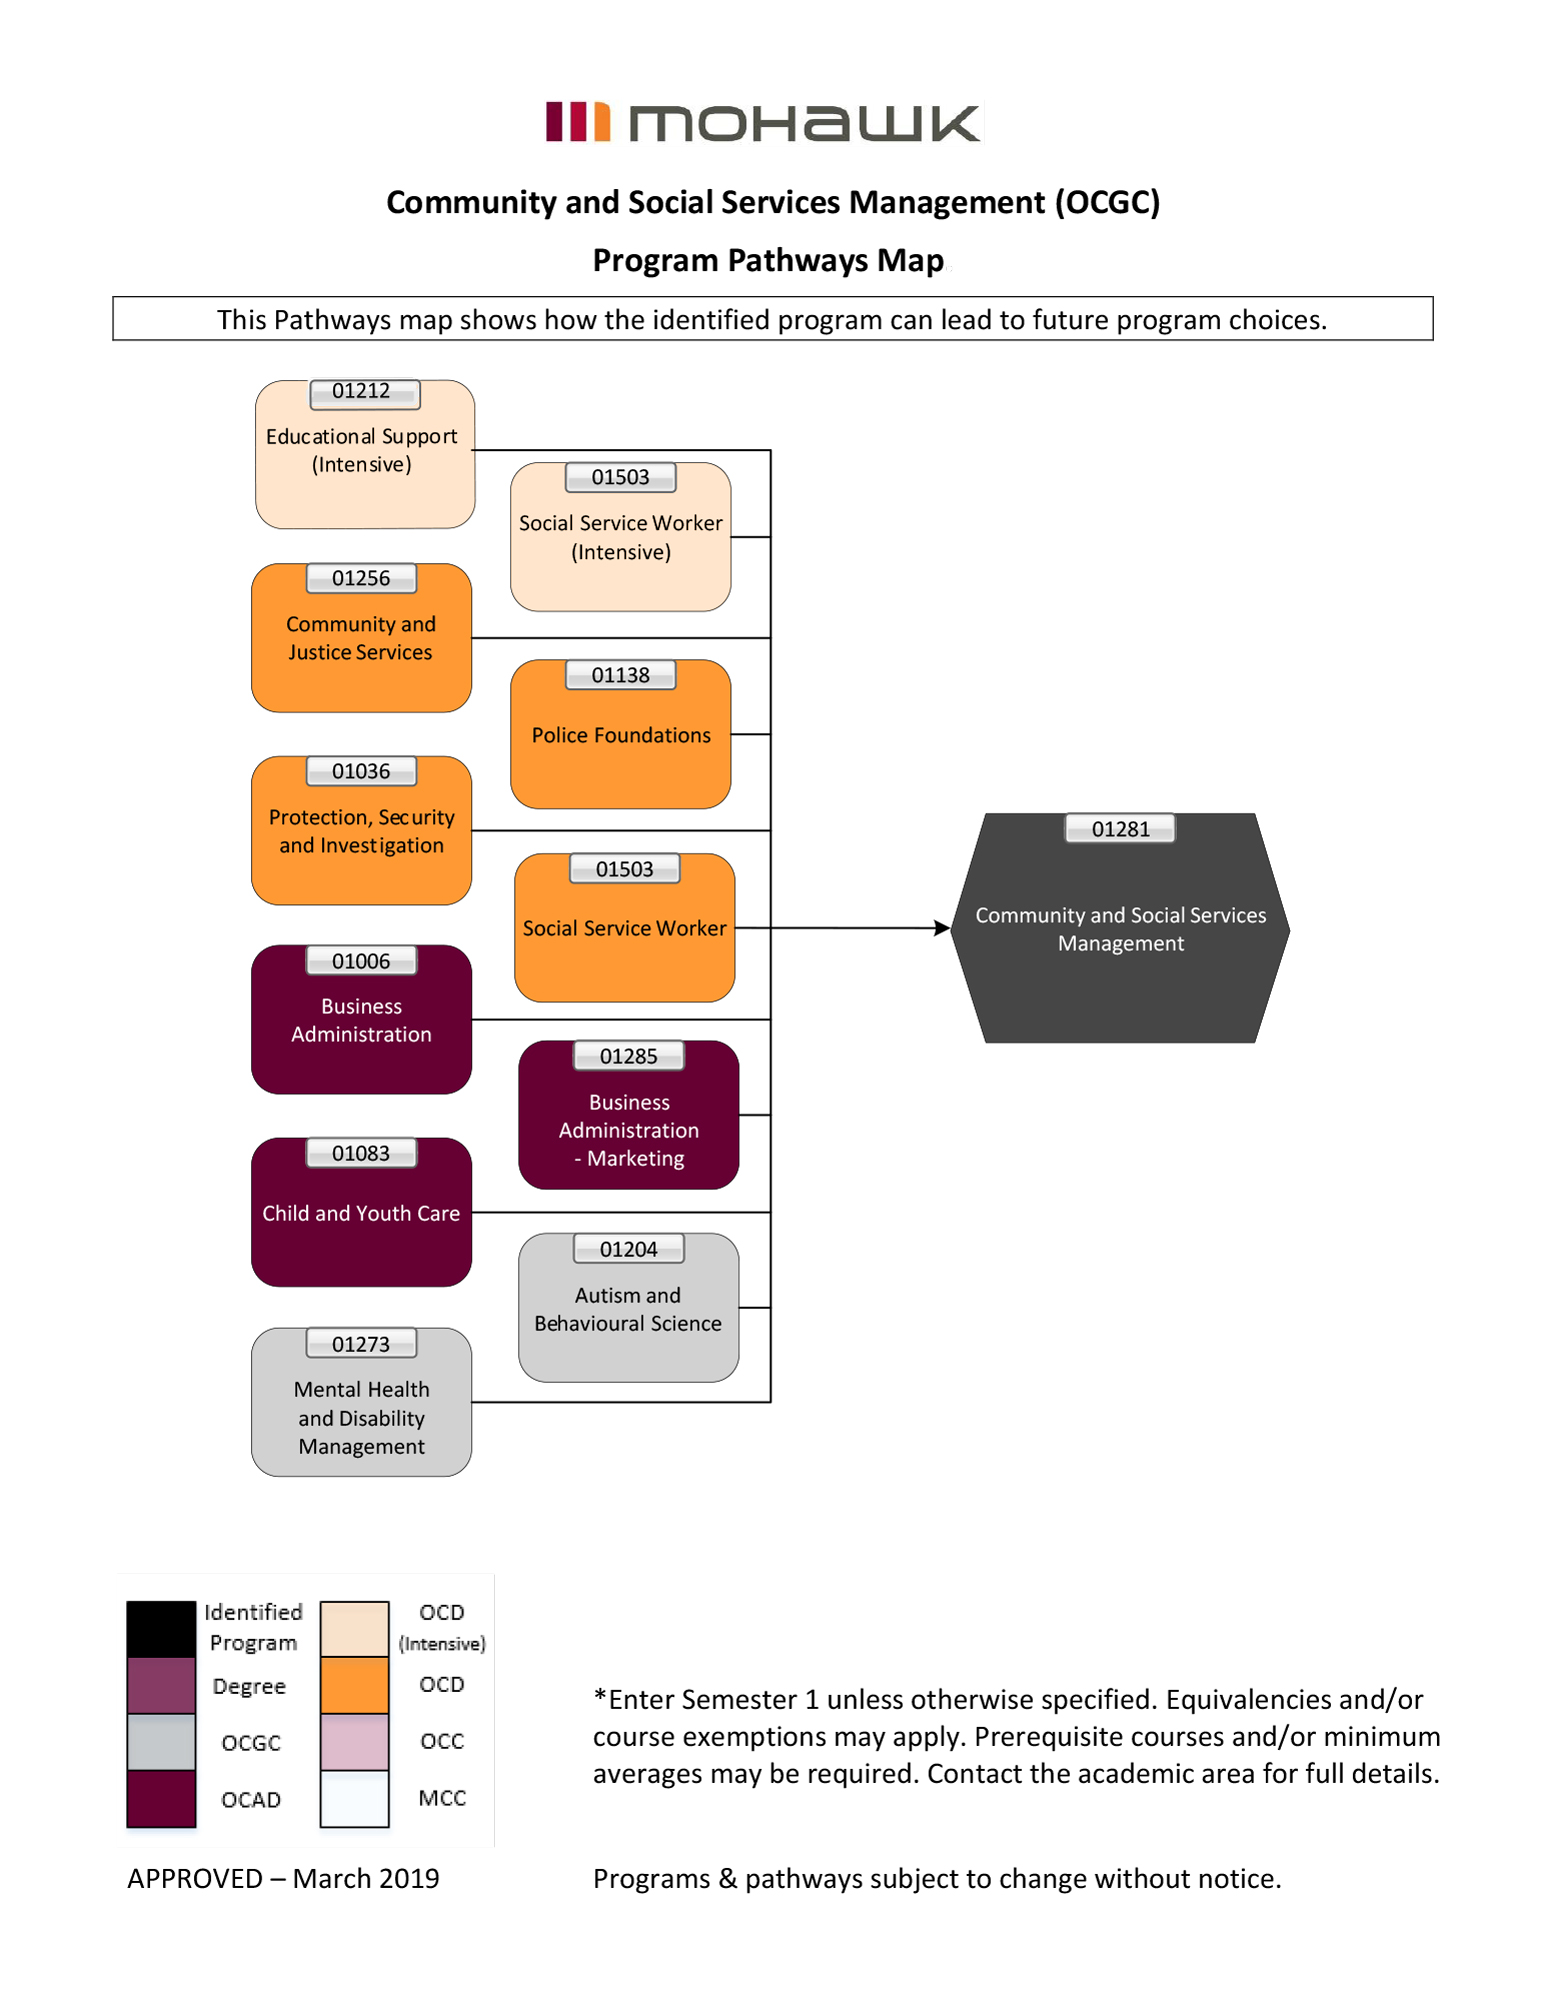 Community and Social Services Management pathways map